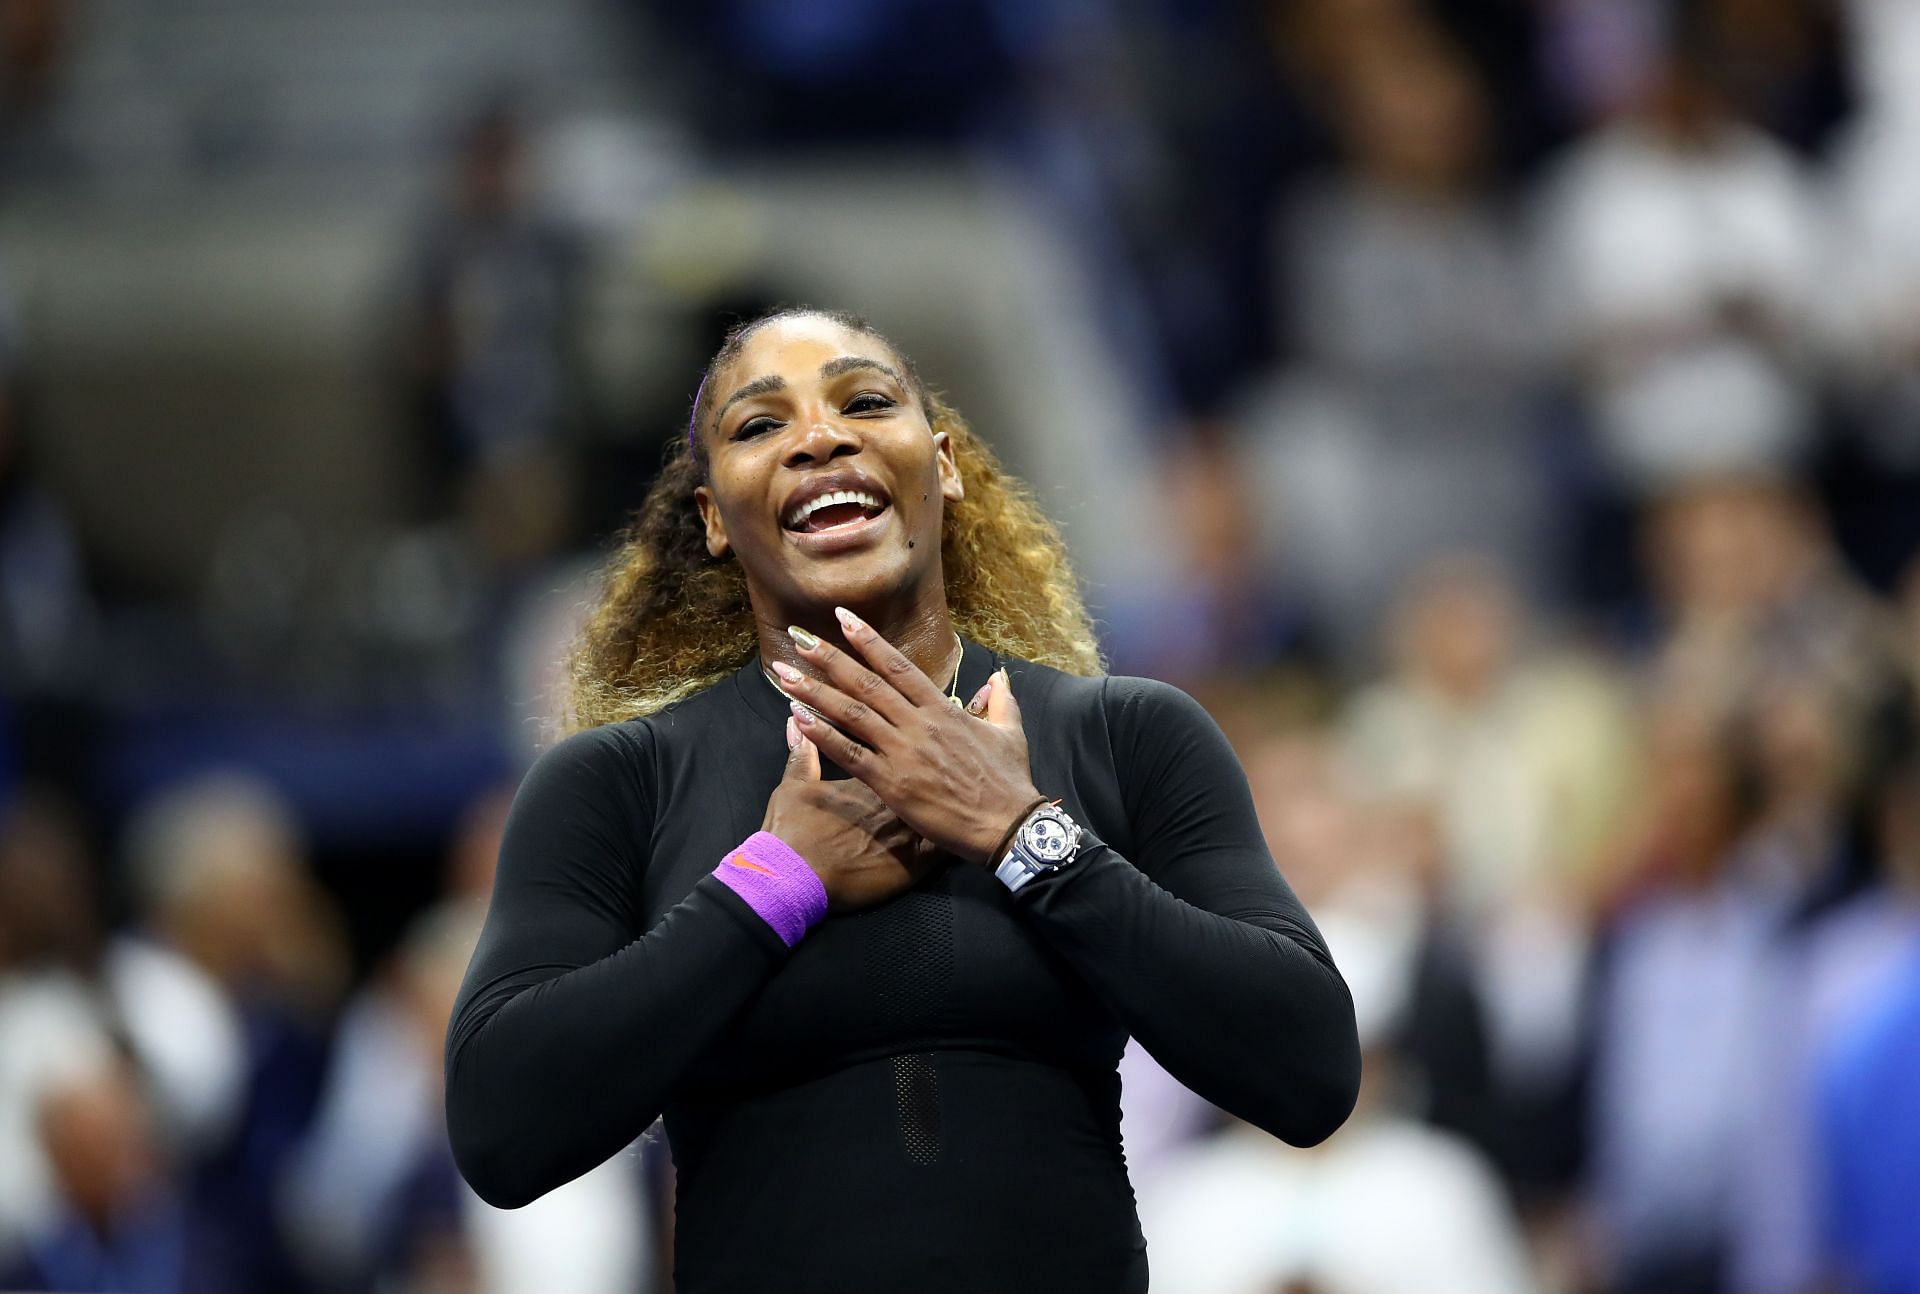 Serena Williams launched S by Serena in fall 2019.